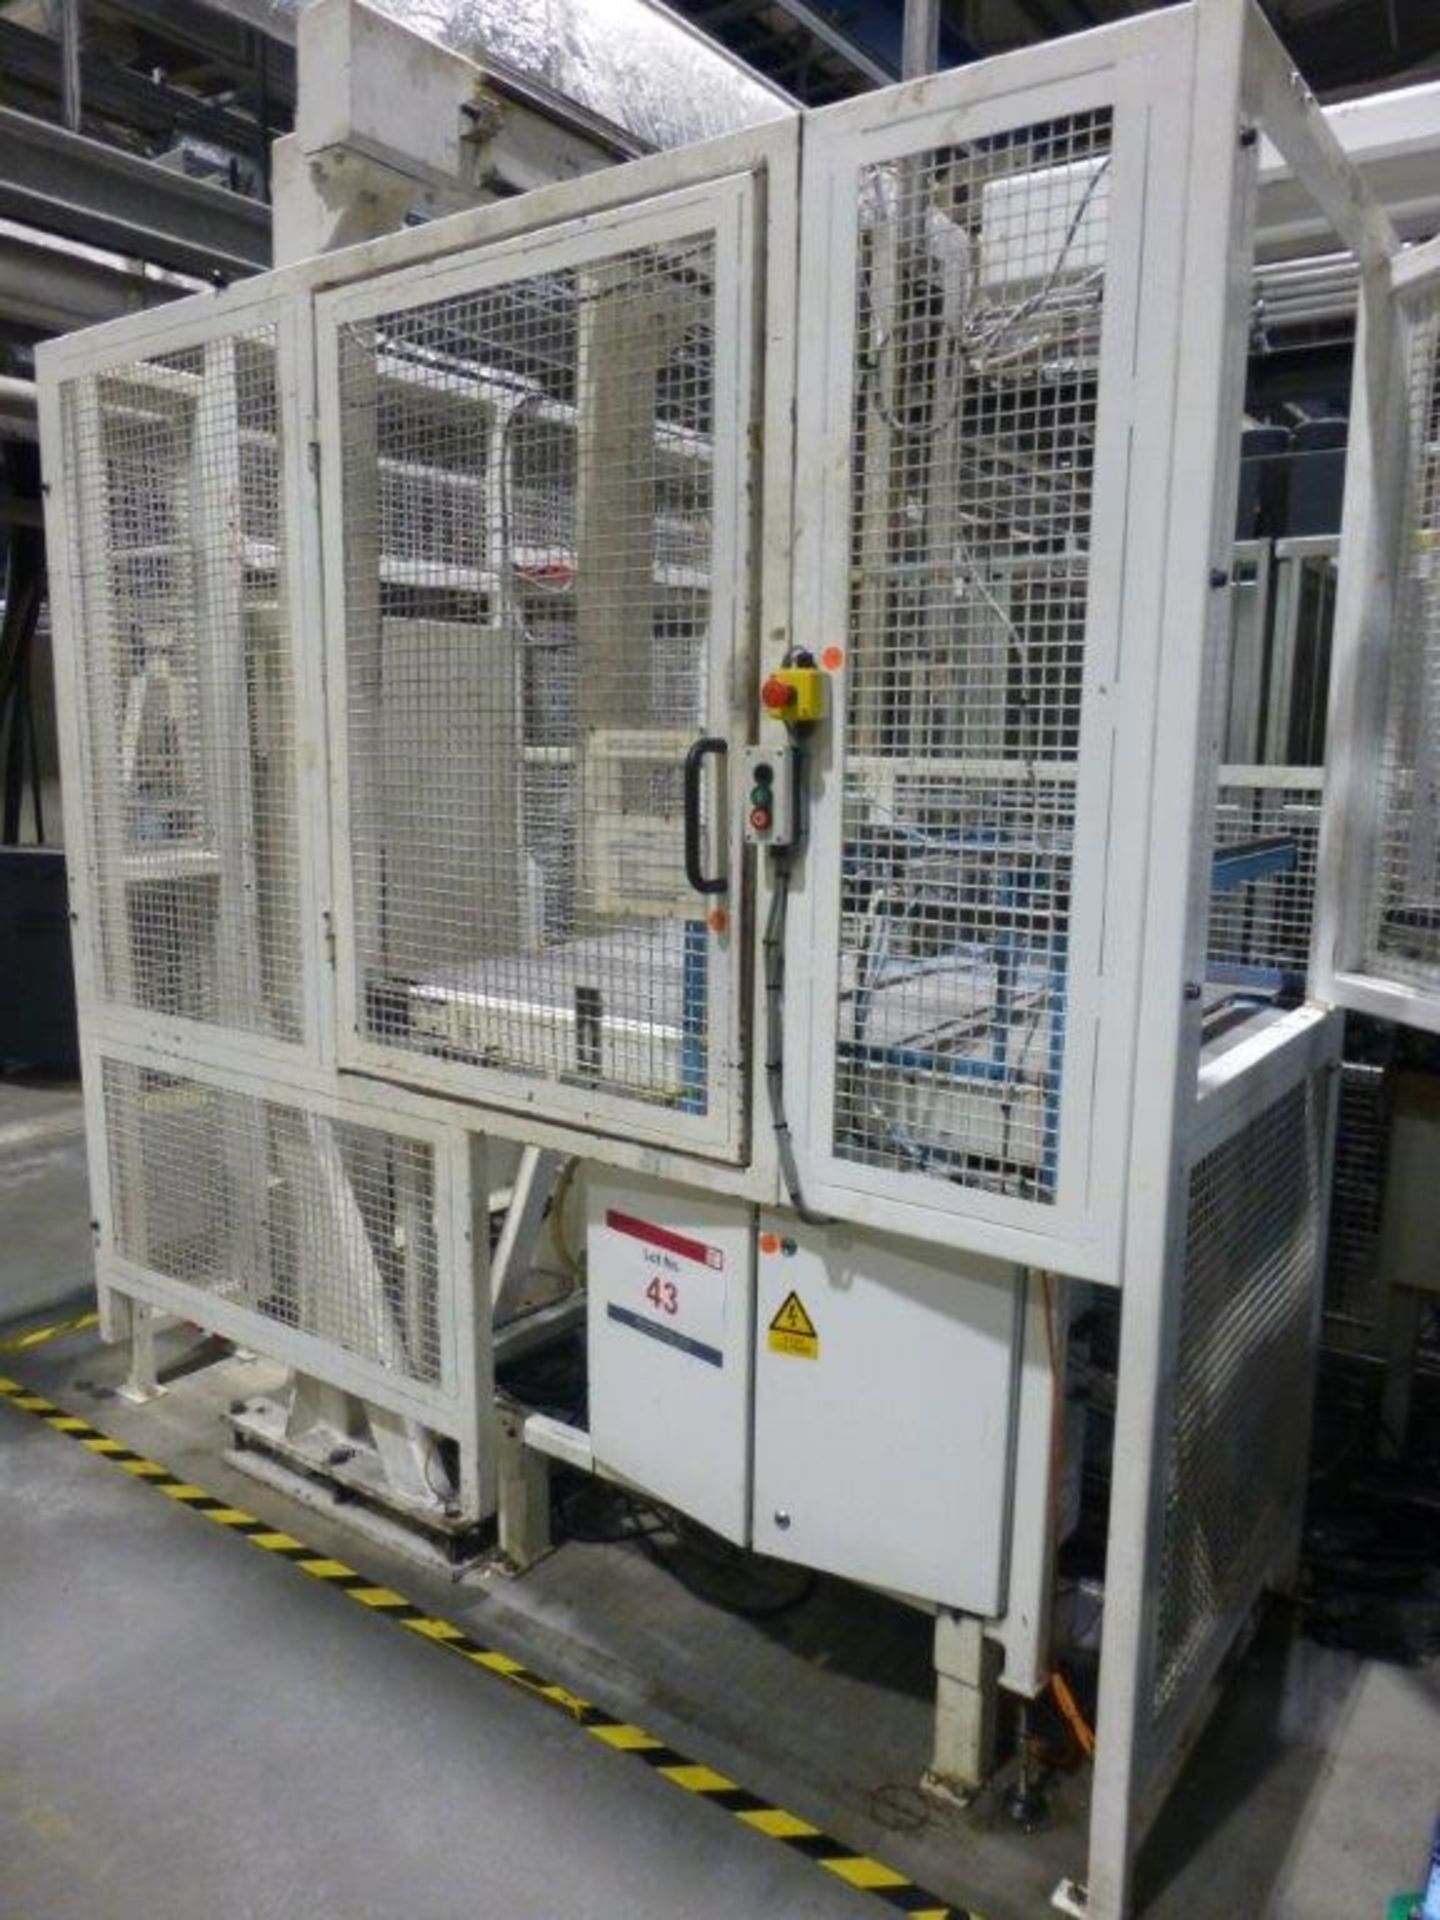 Mechatronic Solutions Type MSP 7 automated DVD case twin arm picking/stacking system, plant No 10293 - Image 5 of 7